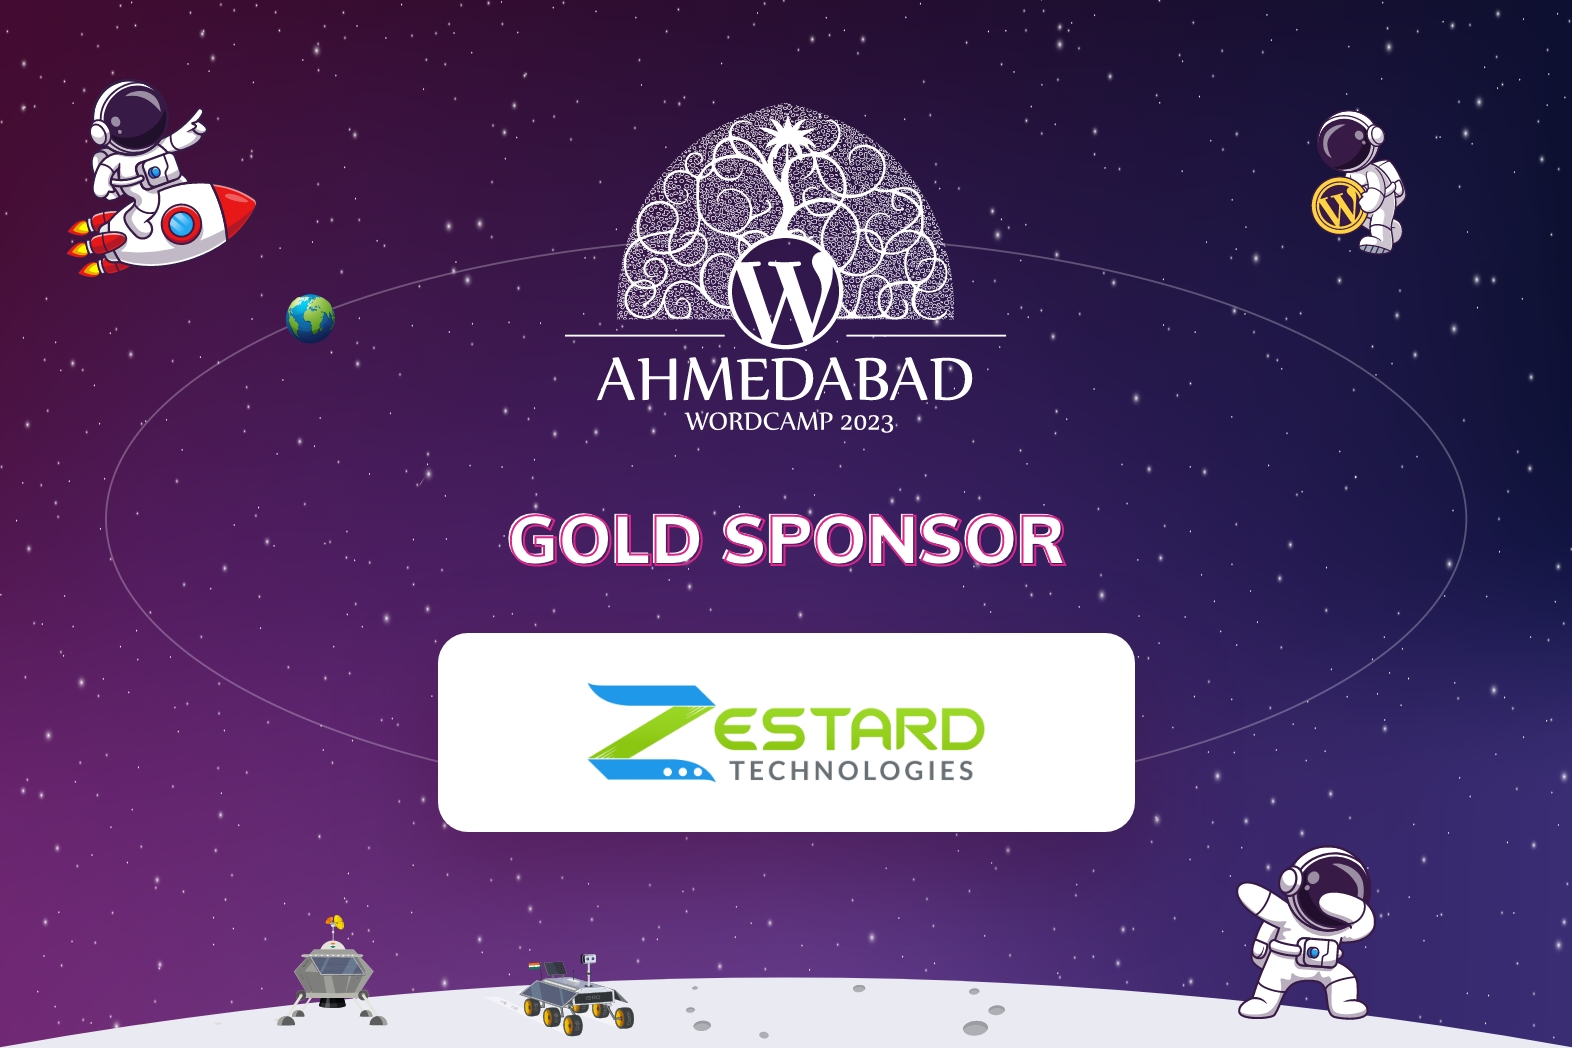 Thank You Zestard Technologies, for being our Gold Sponsor 